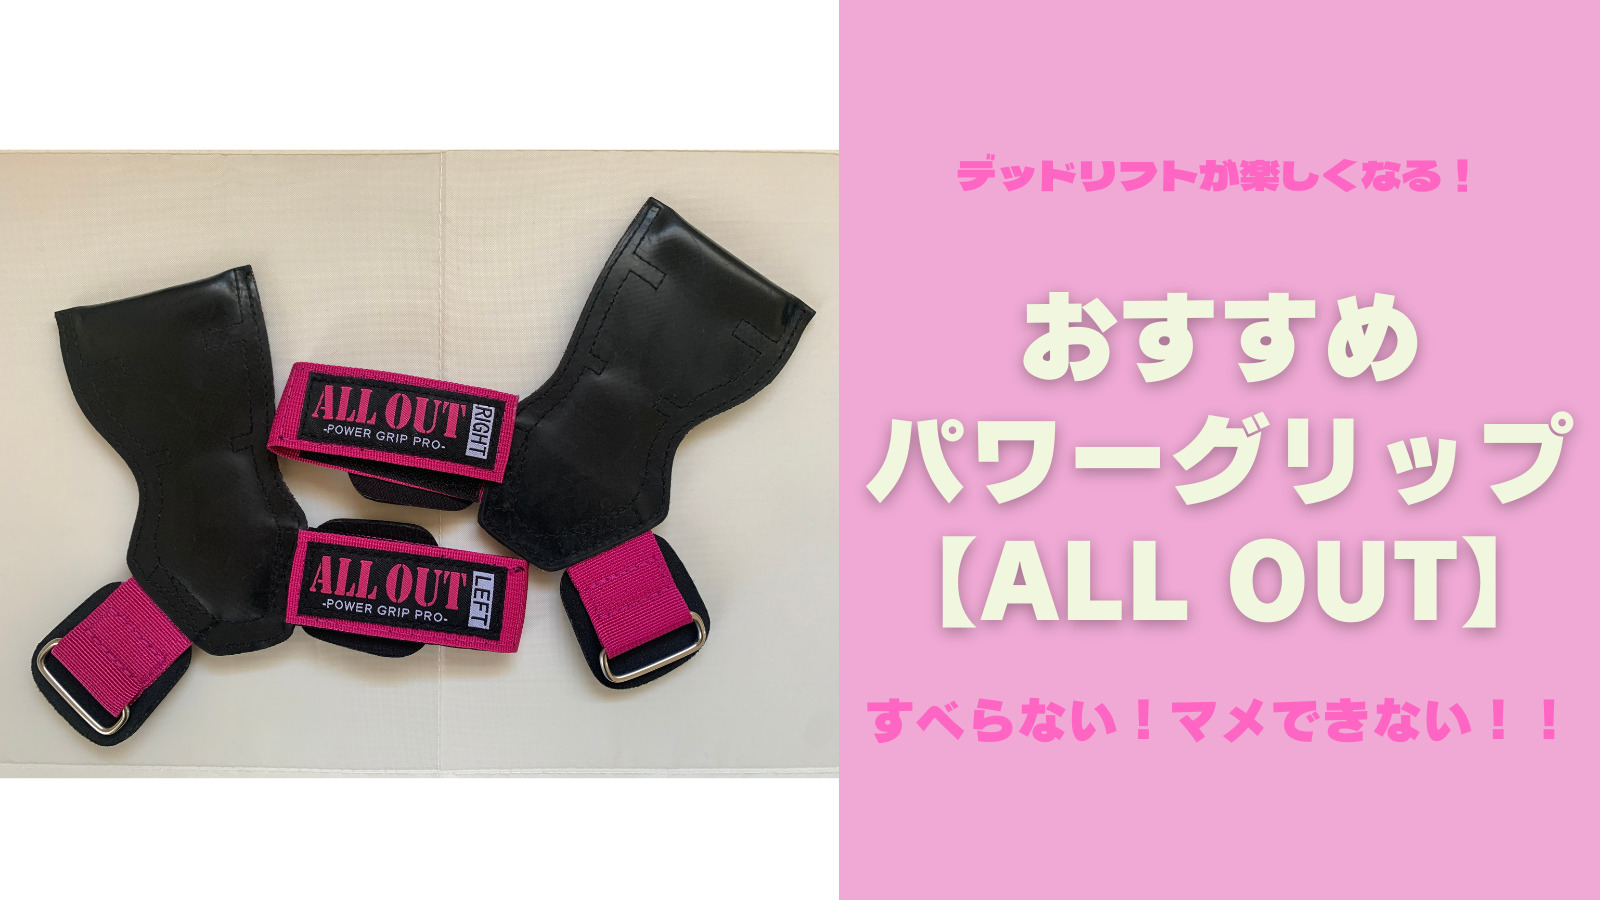 All OUT パワーグリップ　新品未使用品